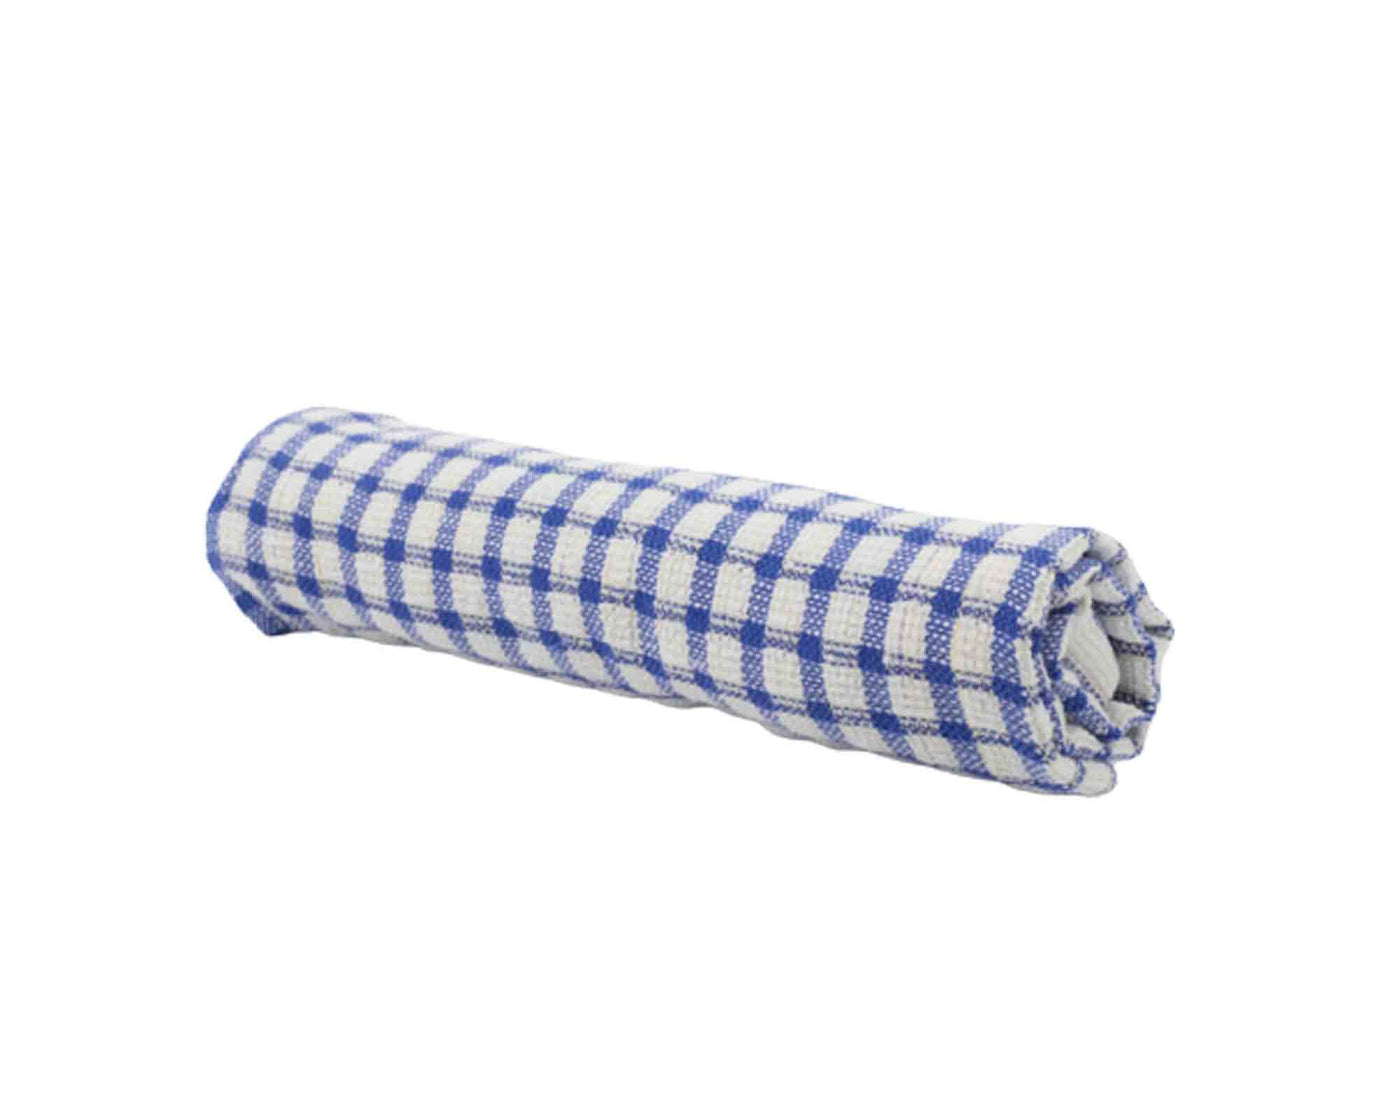 rolled blue patterned tea towel with white backgound 